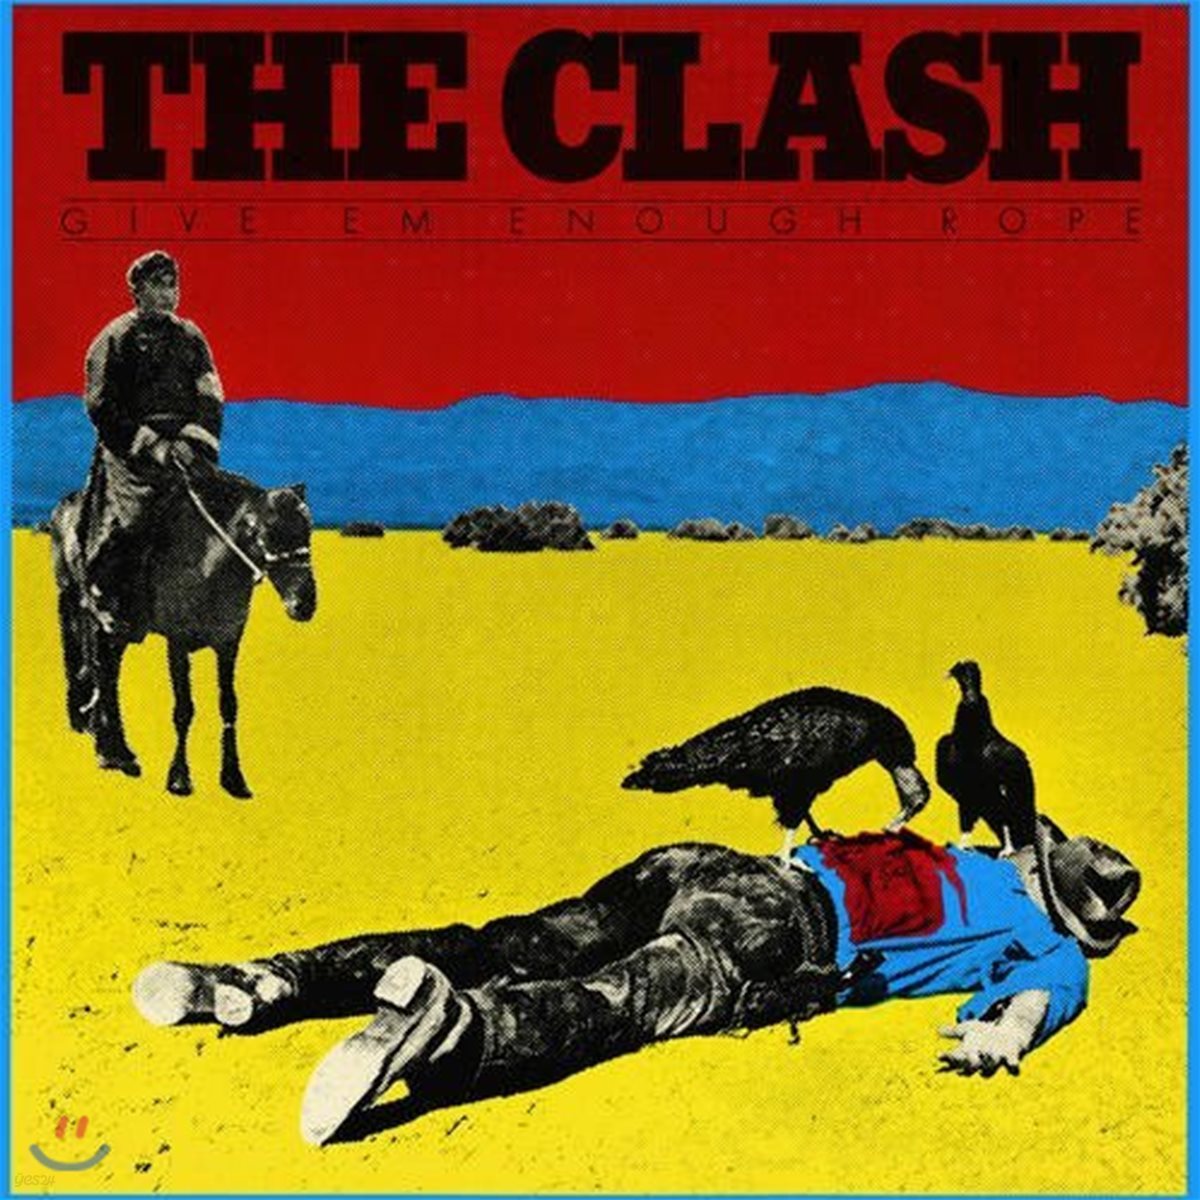 Clash - Give 'Em Enough Rope